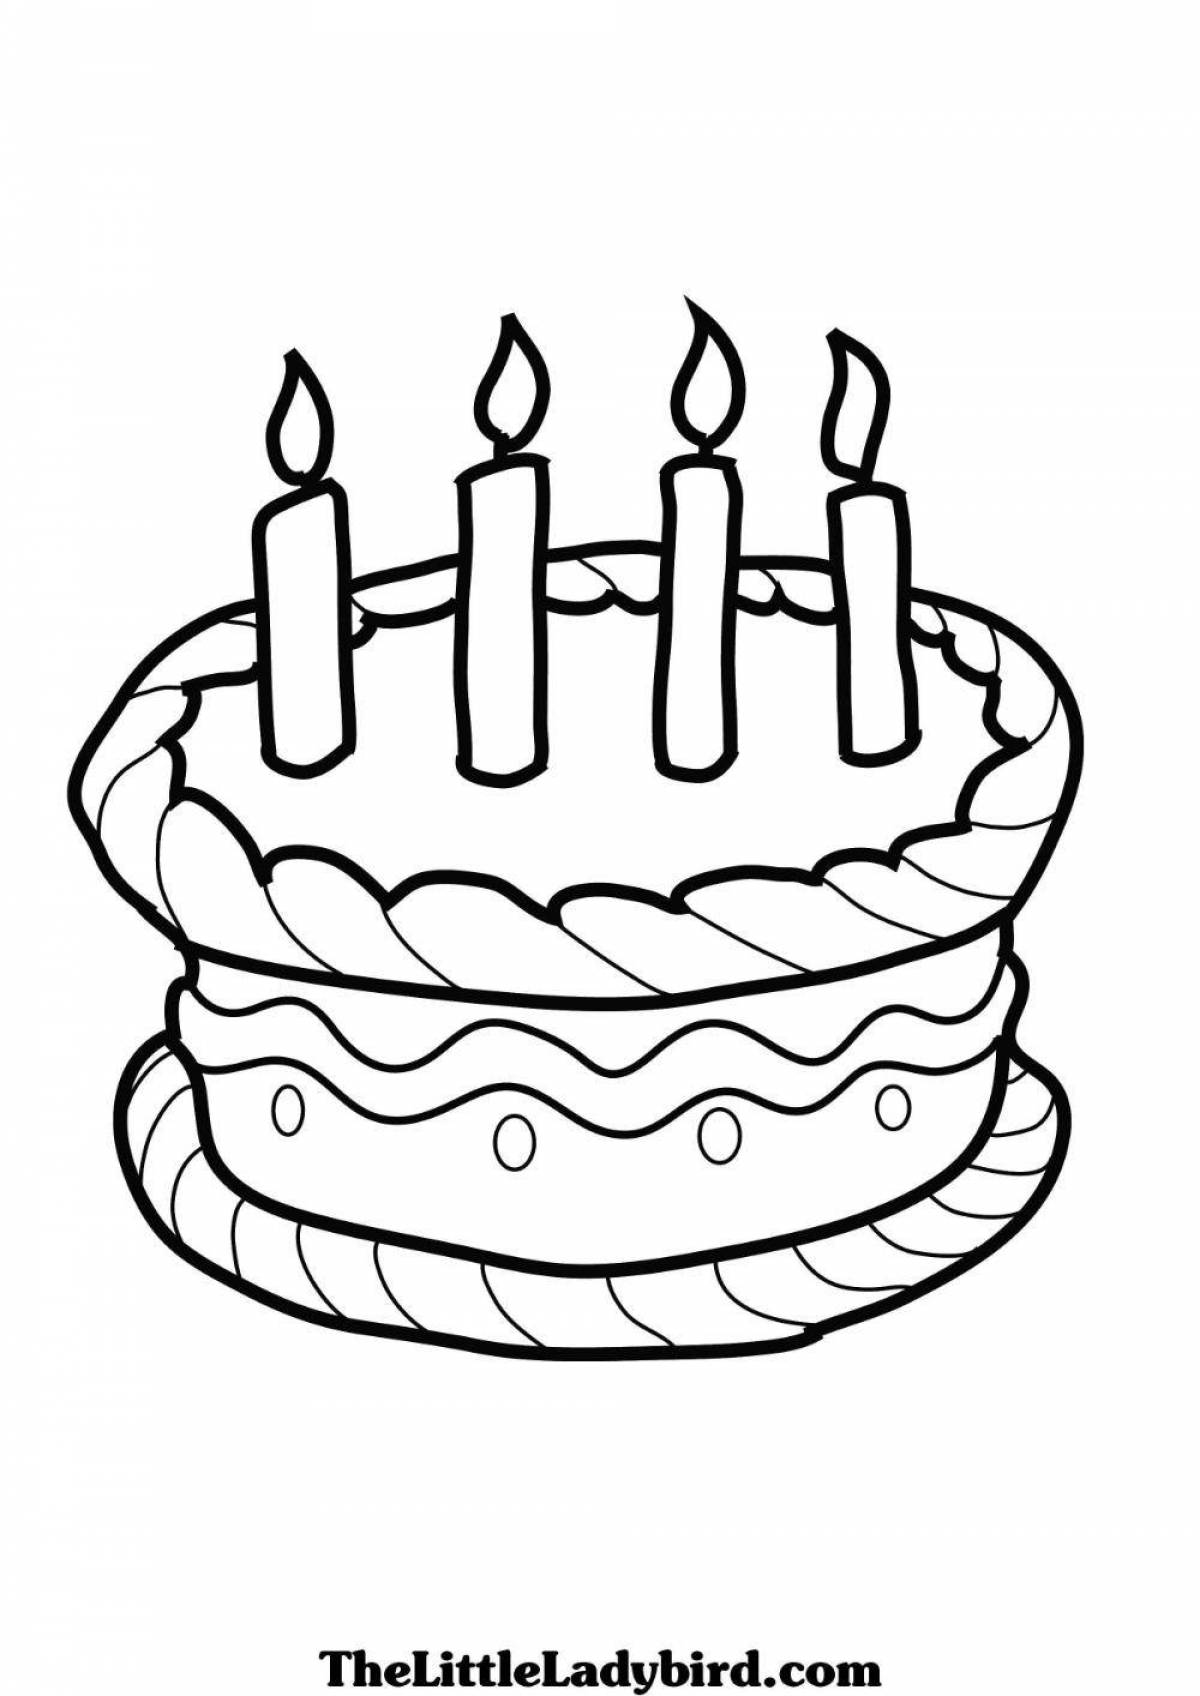 Gourmet cake coloring page